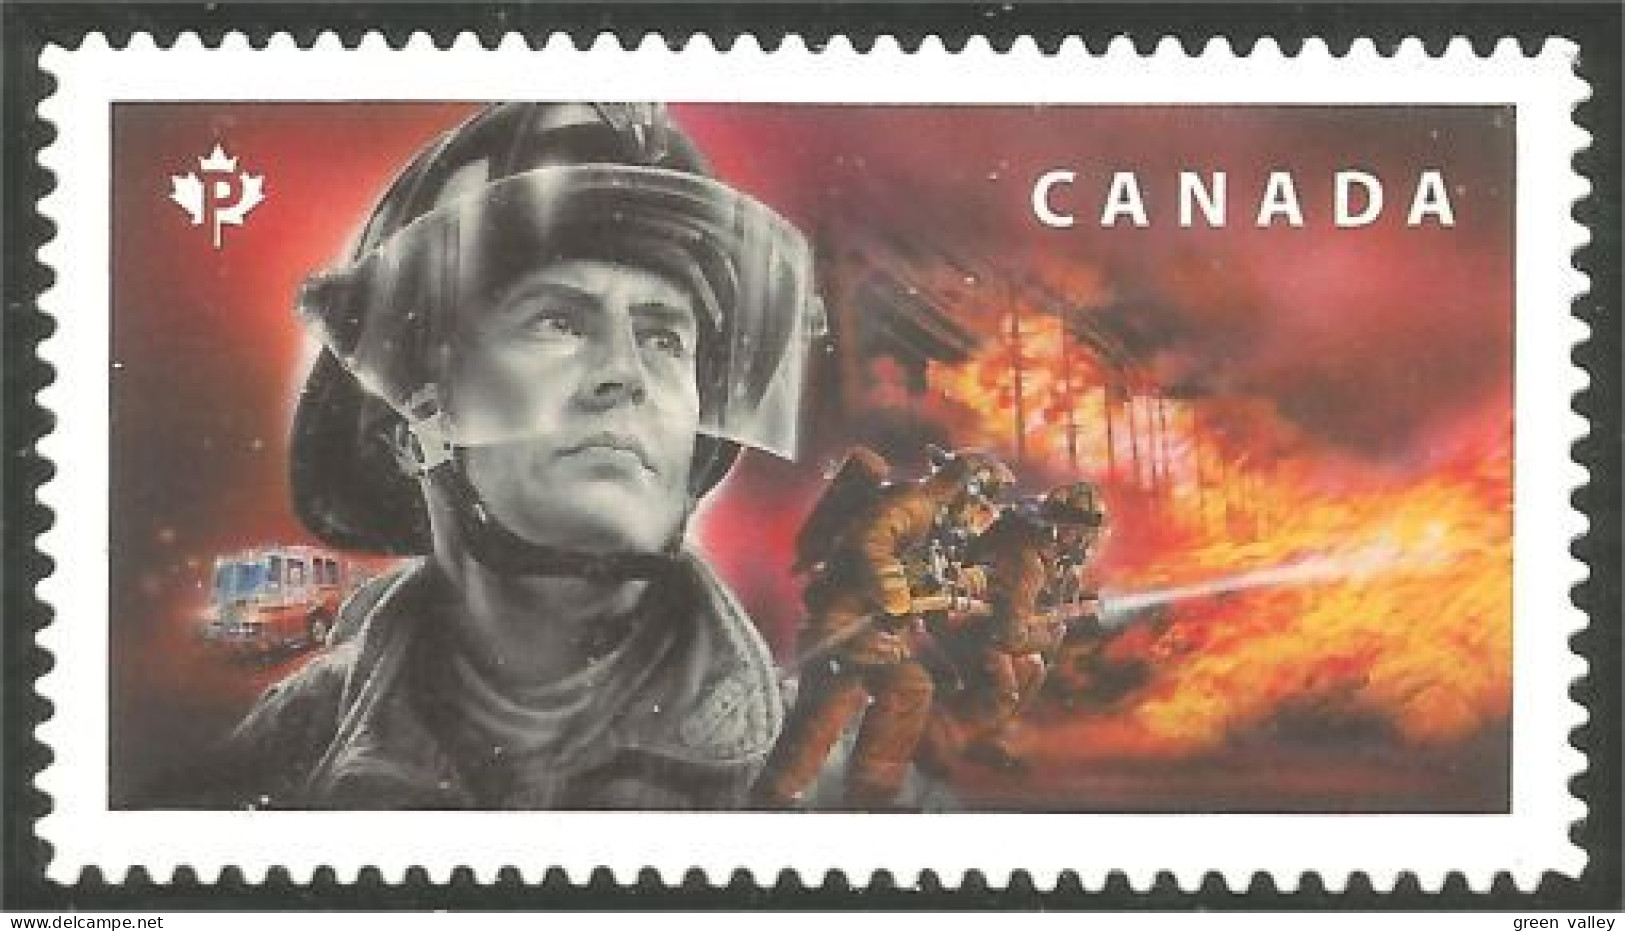 Canada Firefighters Pompiers Bomberos Truck Annual Collection Annuelle MNH ** Neuf SC (C31-25c) - Camiones